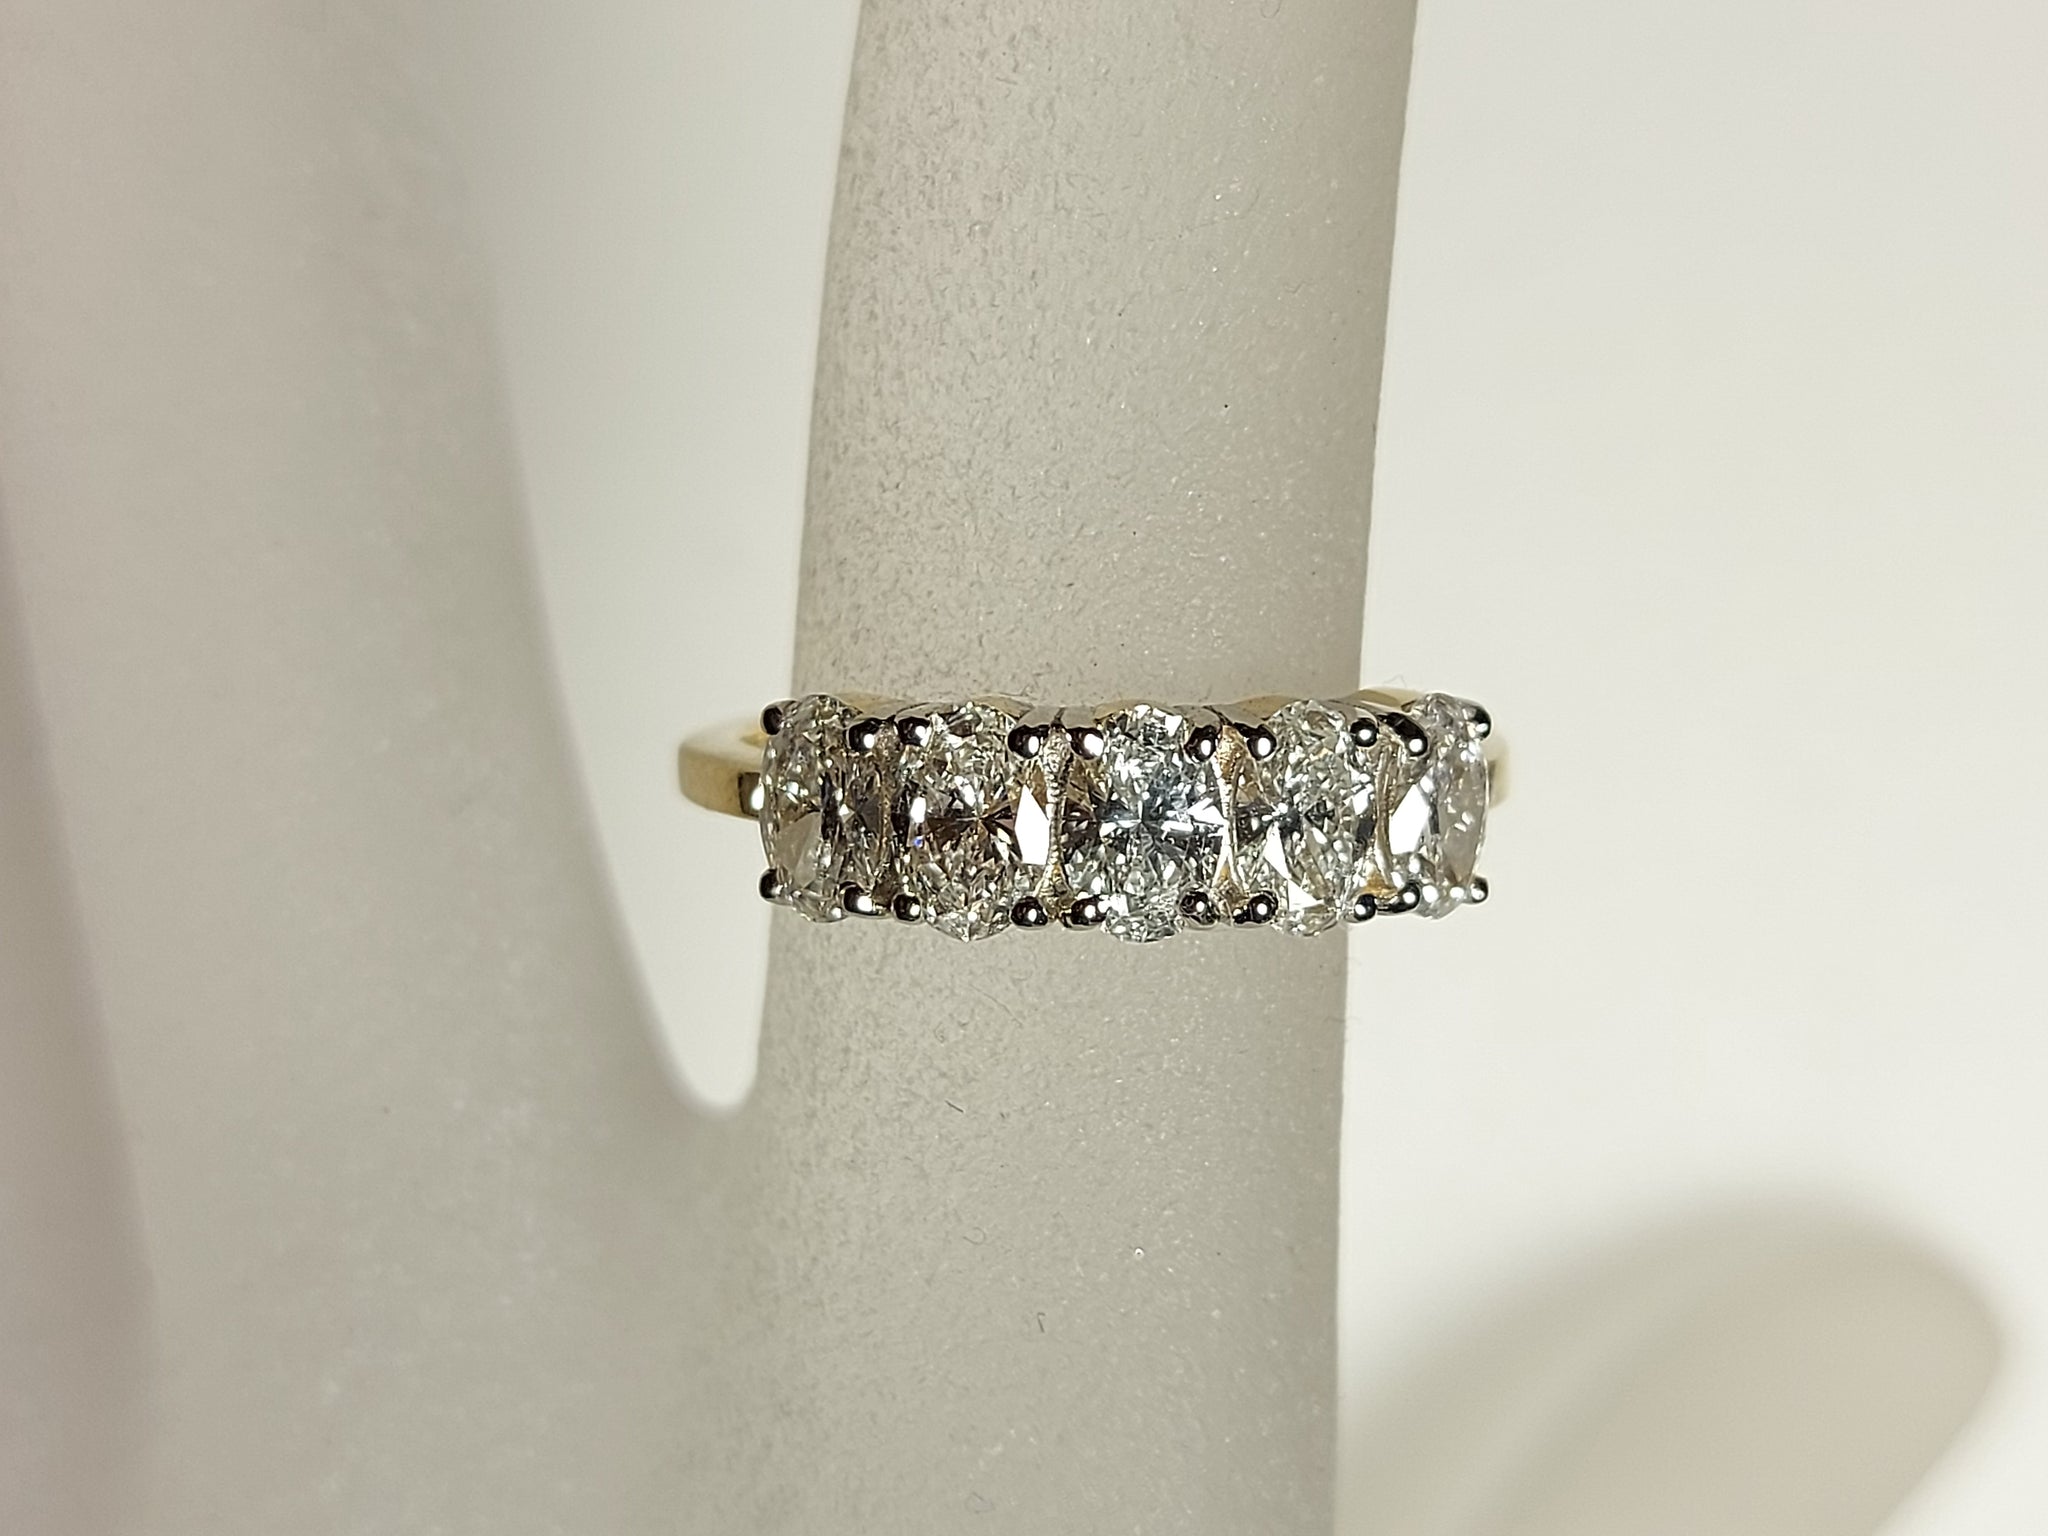 5 Stone Oval Cut Diamond Ring / Wedding Band in Gold